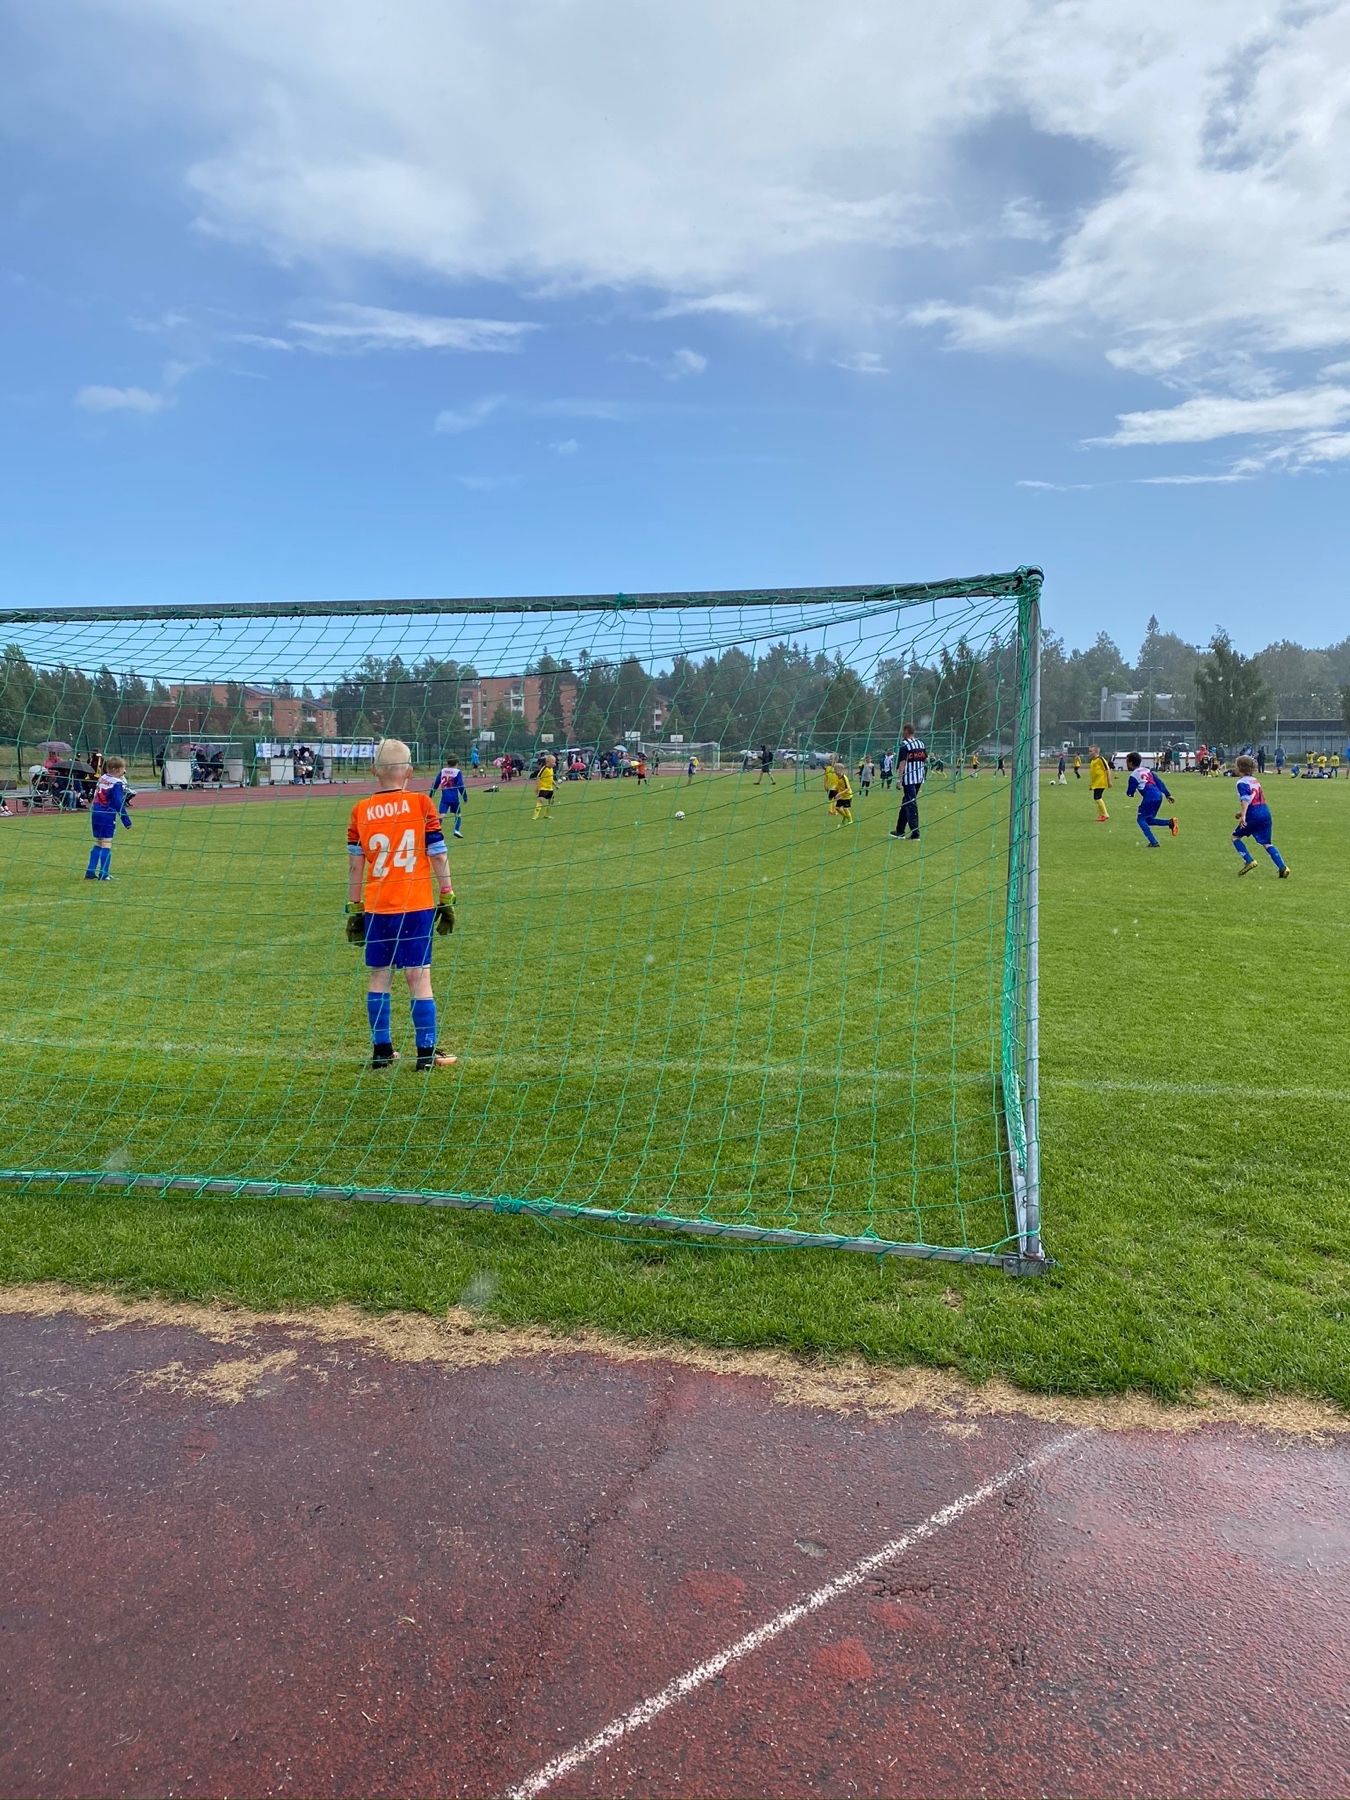 boy standing as a goal keeper in orange shirt, game going on further up field